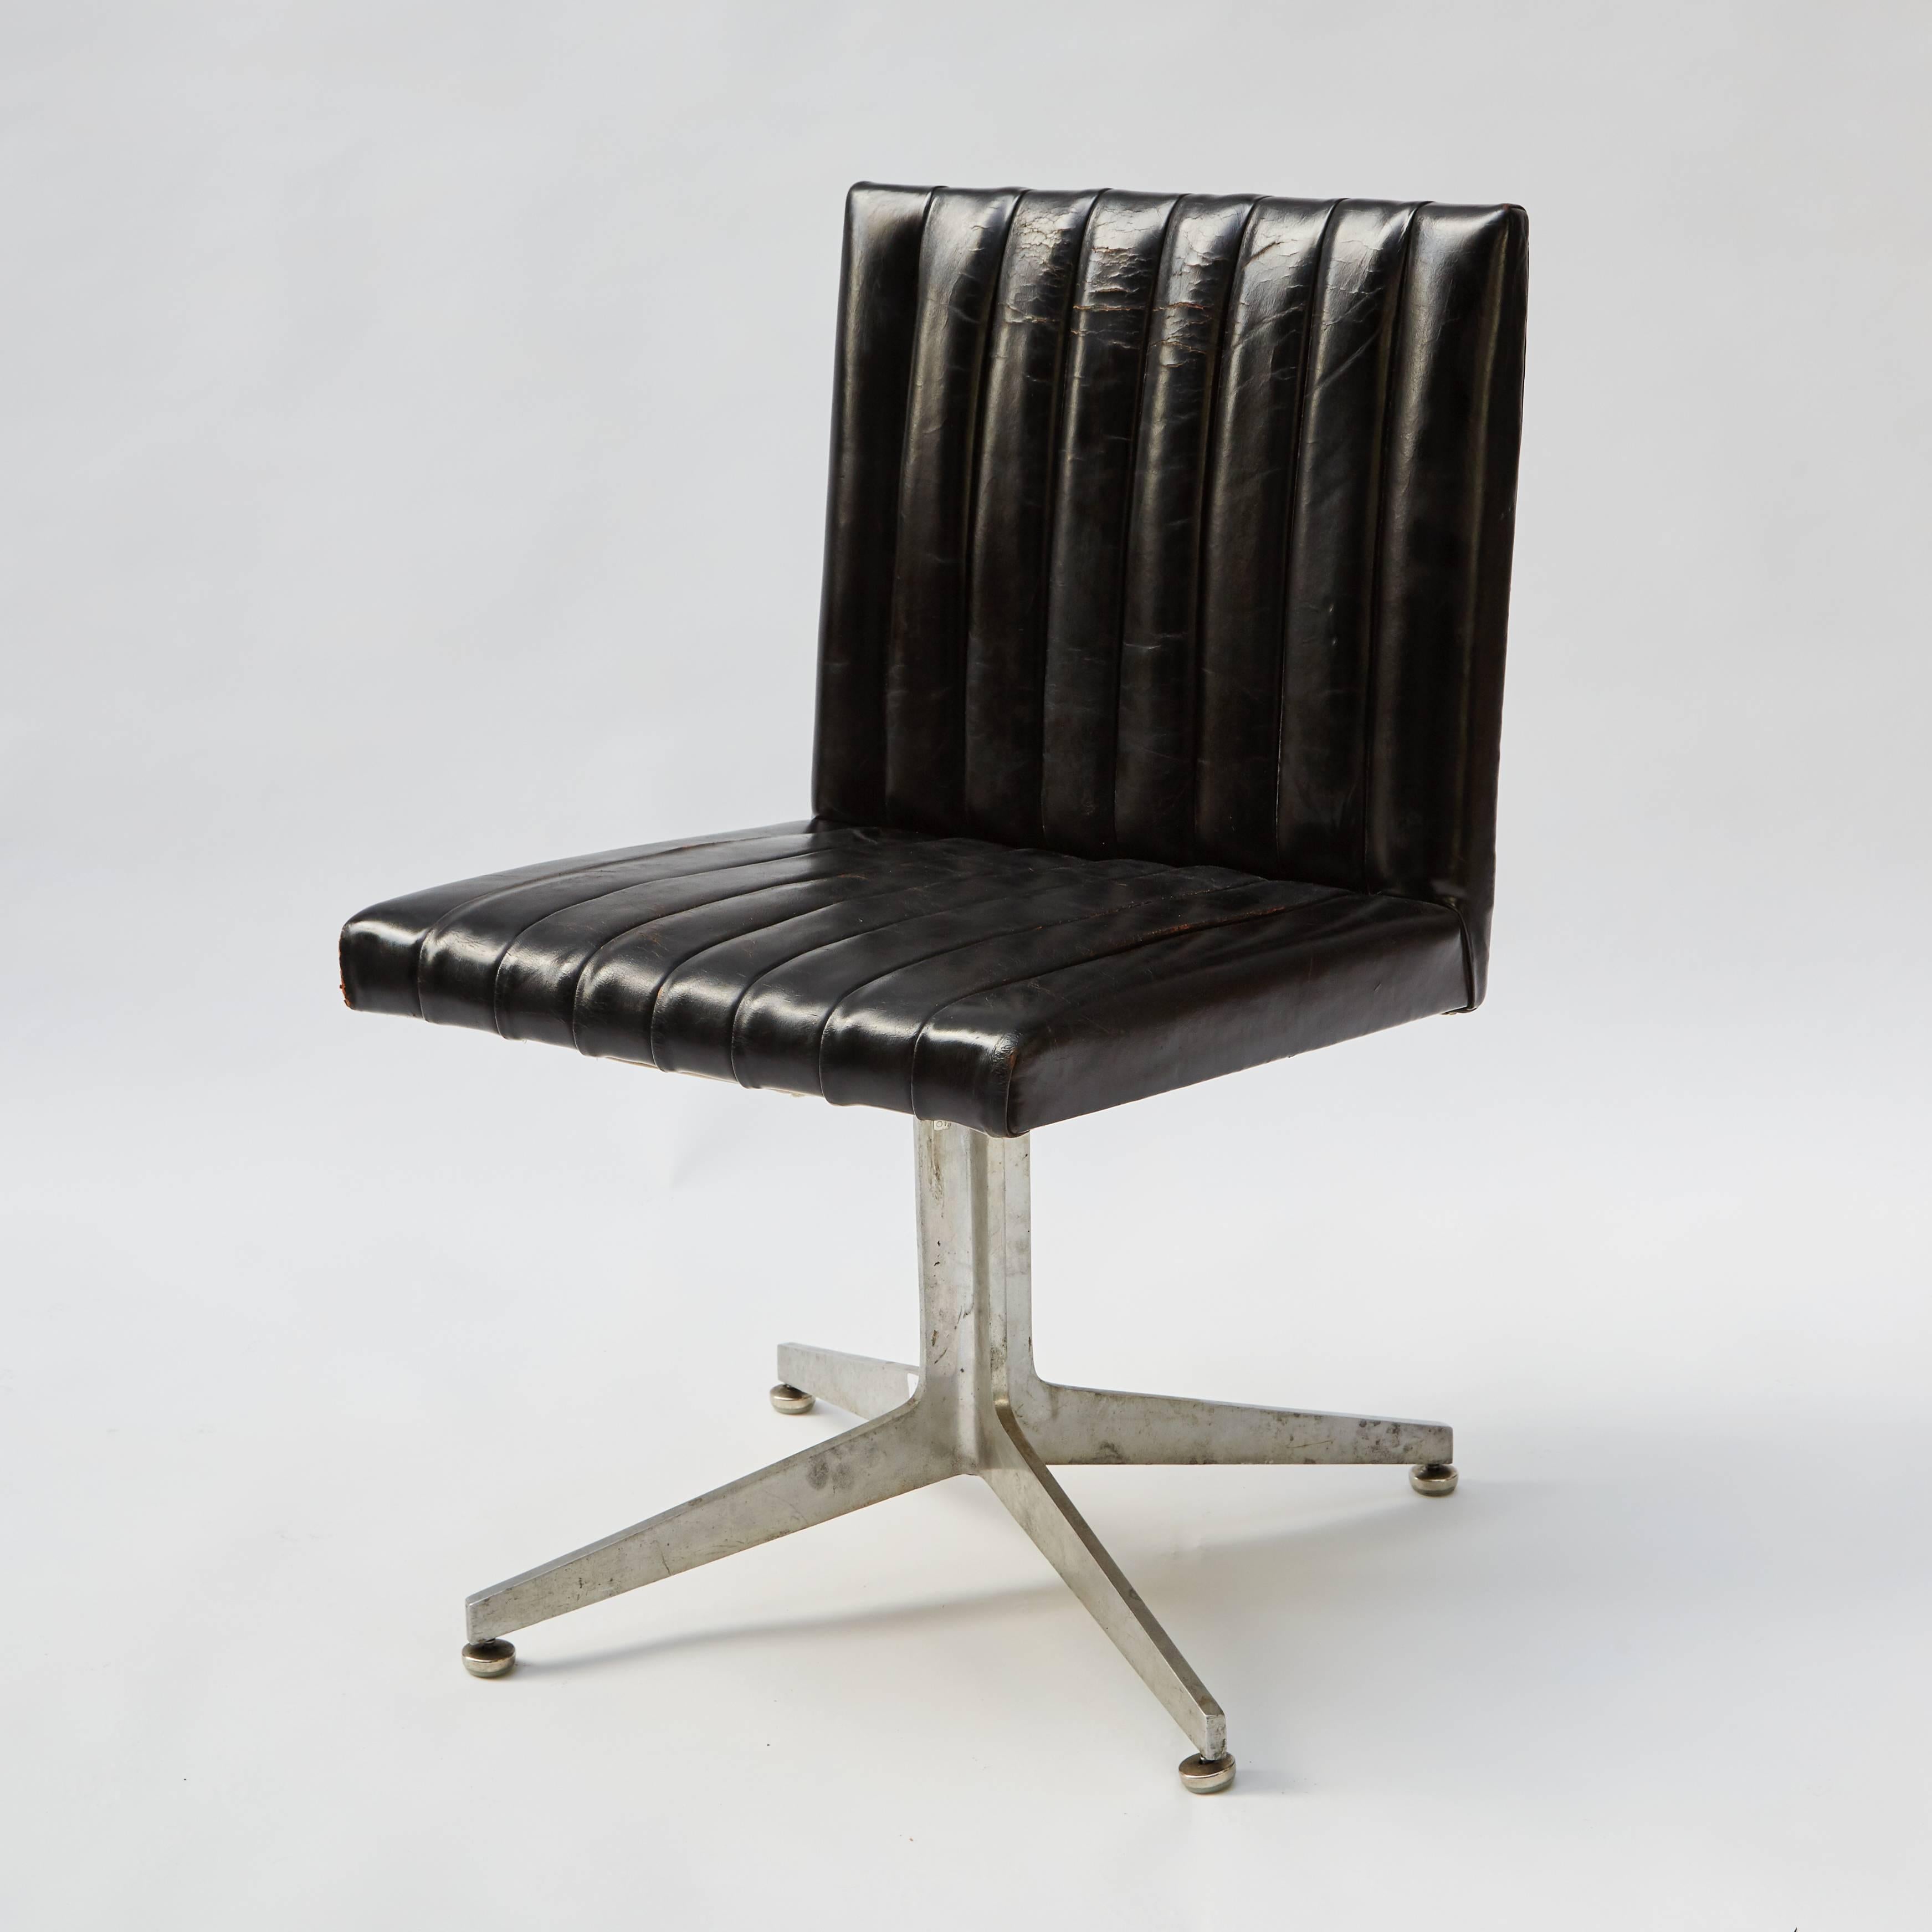 Rare set of four Eames for Herman Miller dining or office chairs. These iconic mid-century modern swivel chairs feature black leather upholstery with stitched vertical patterning along the seat-backs and minimalist chrome spider-foot pedestal bases.